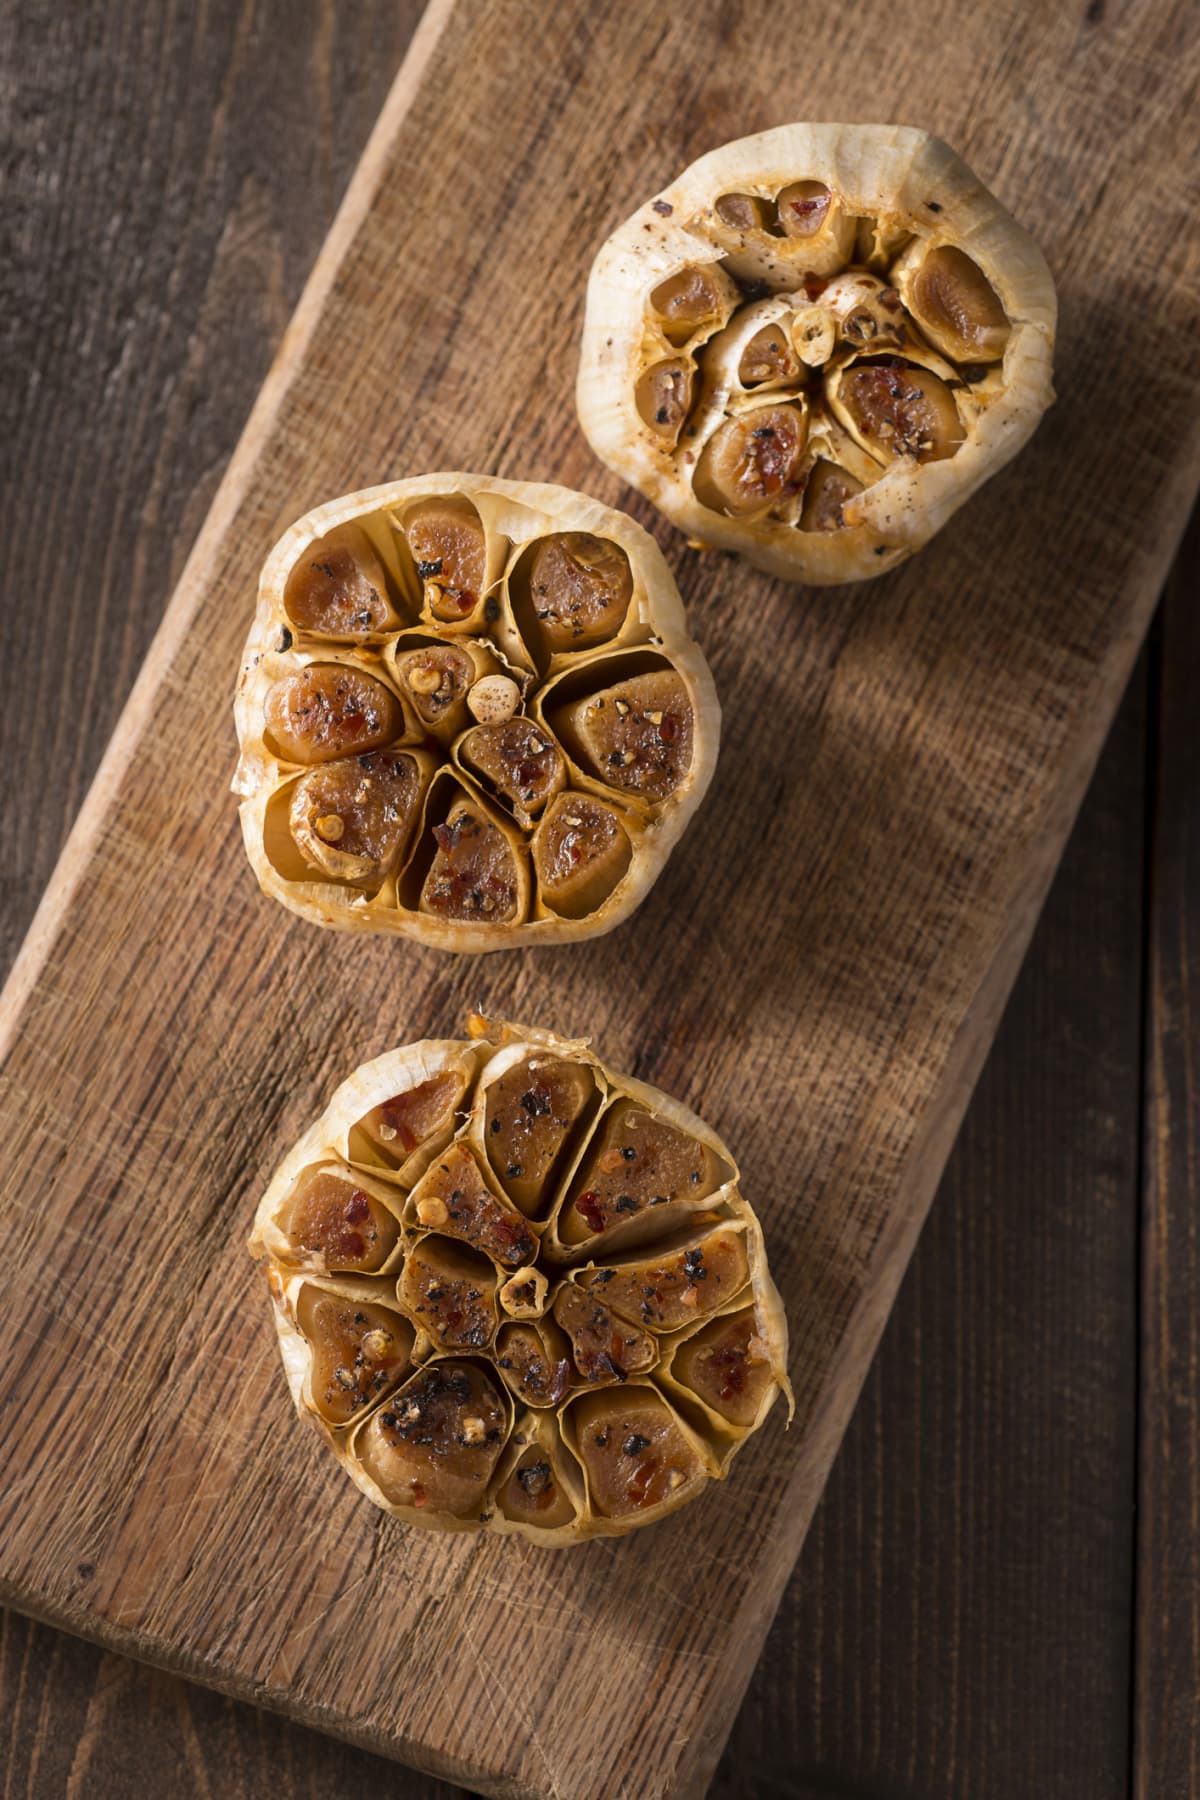 Roasted garlic bulbs on a wooden serving board